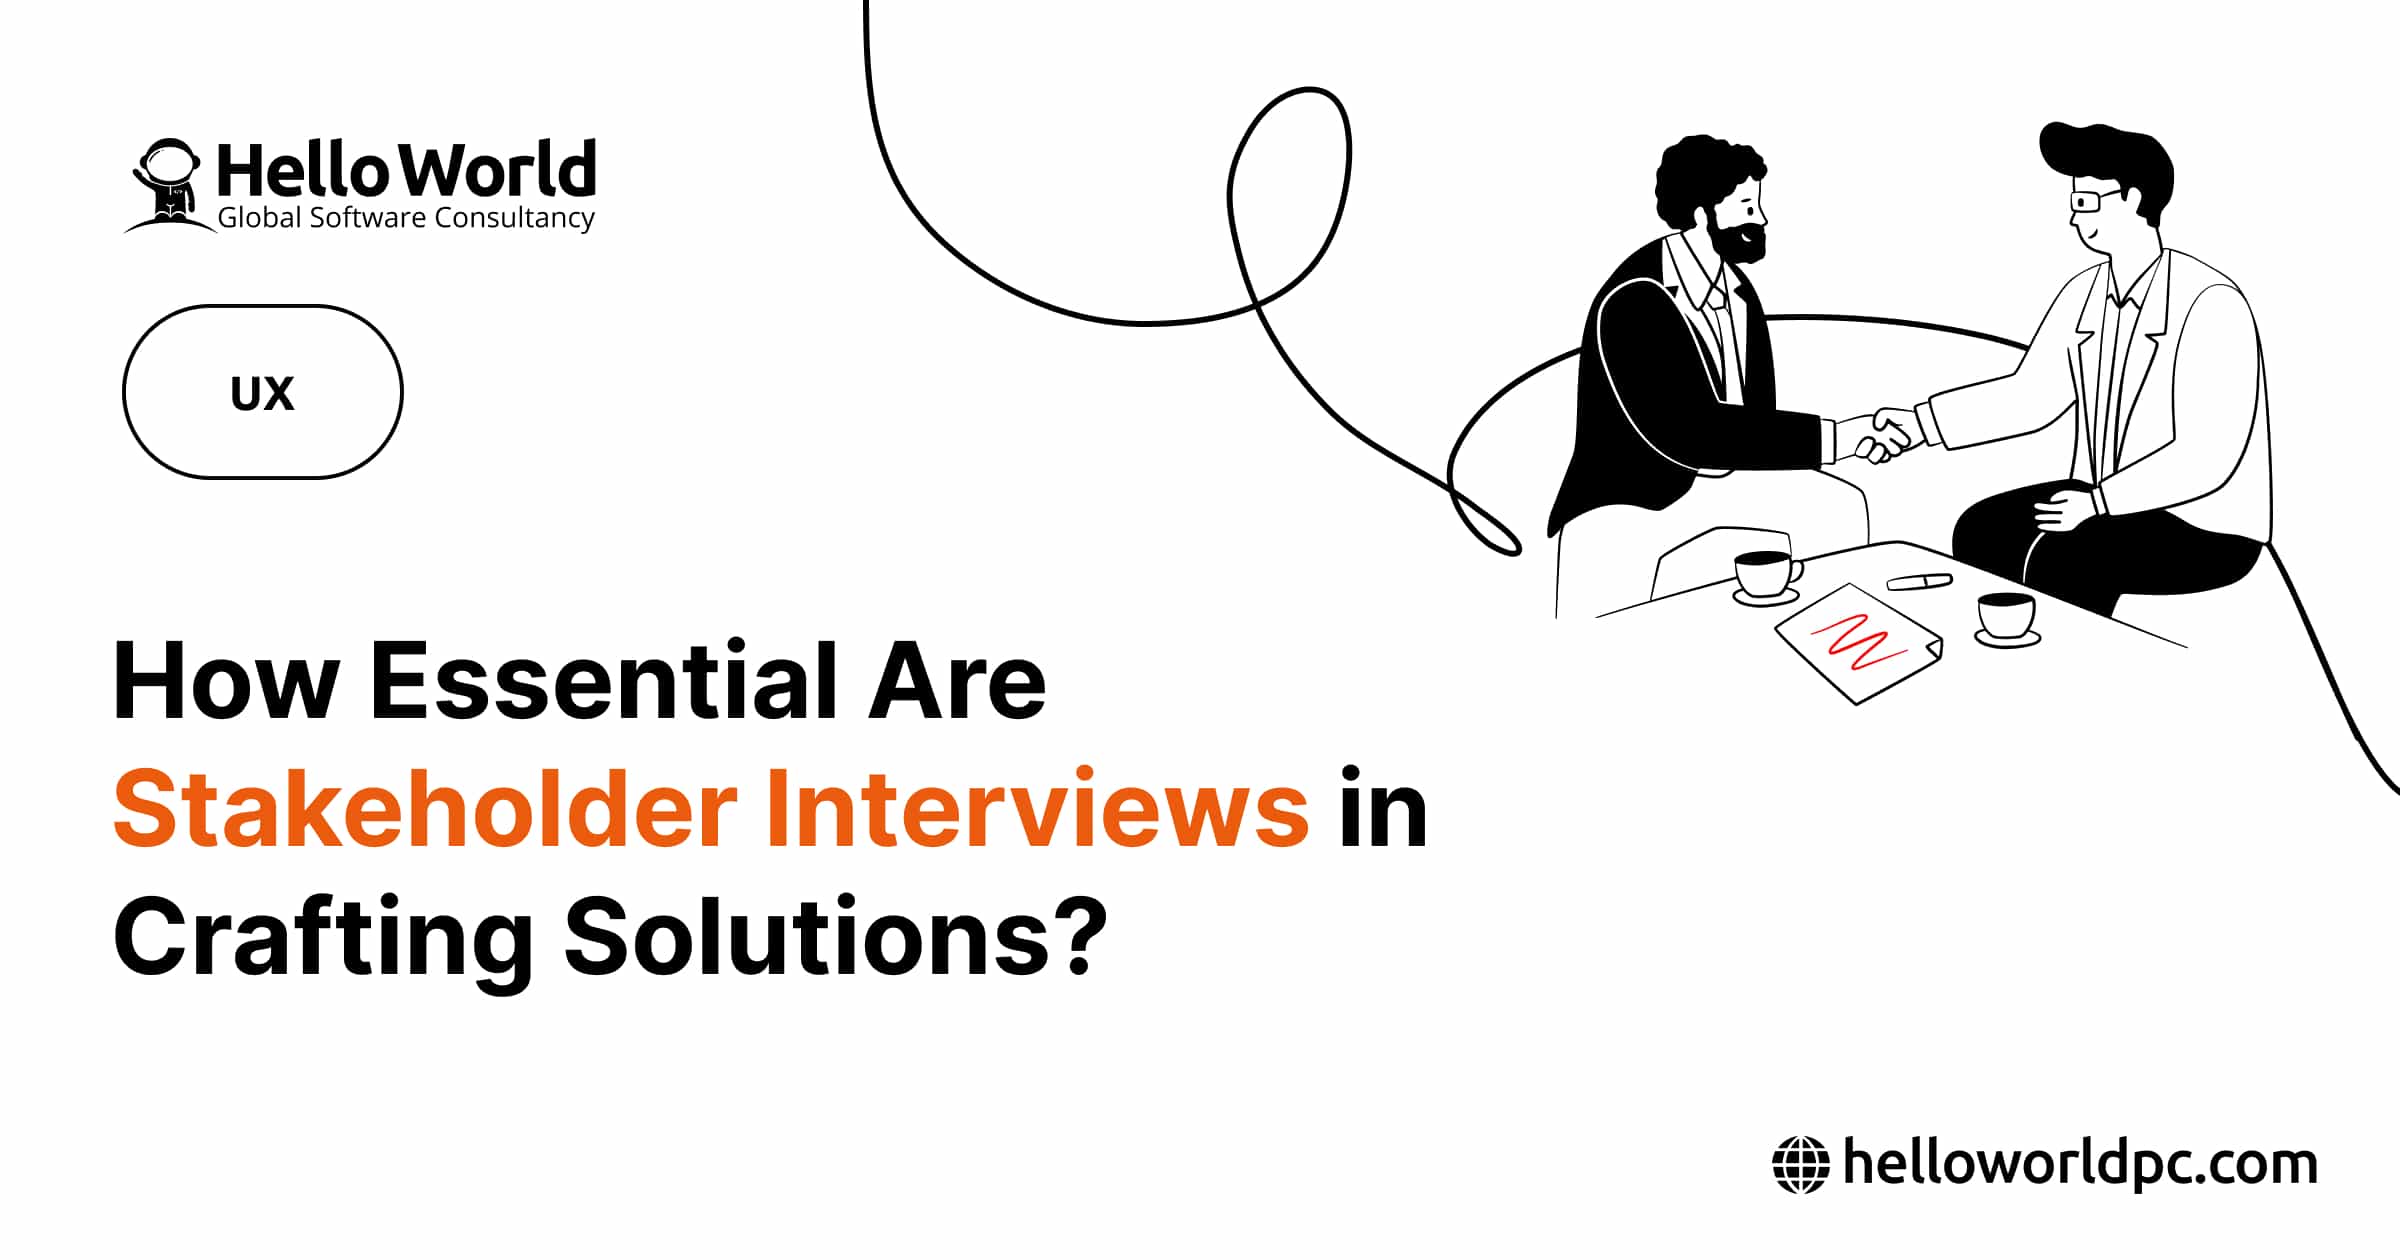 How Essential Are Stakeholder Interviews in Crafting Solutions?